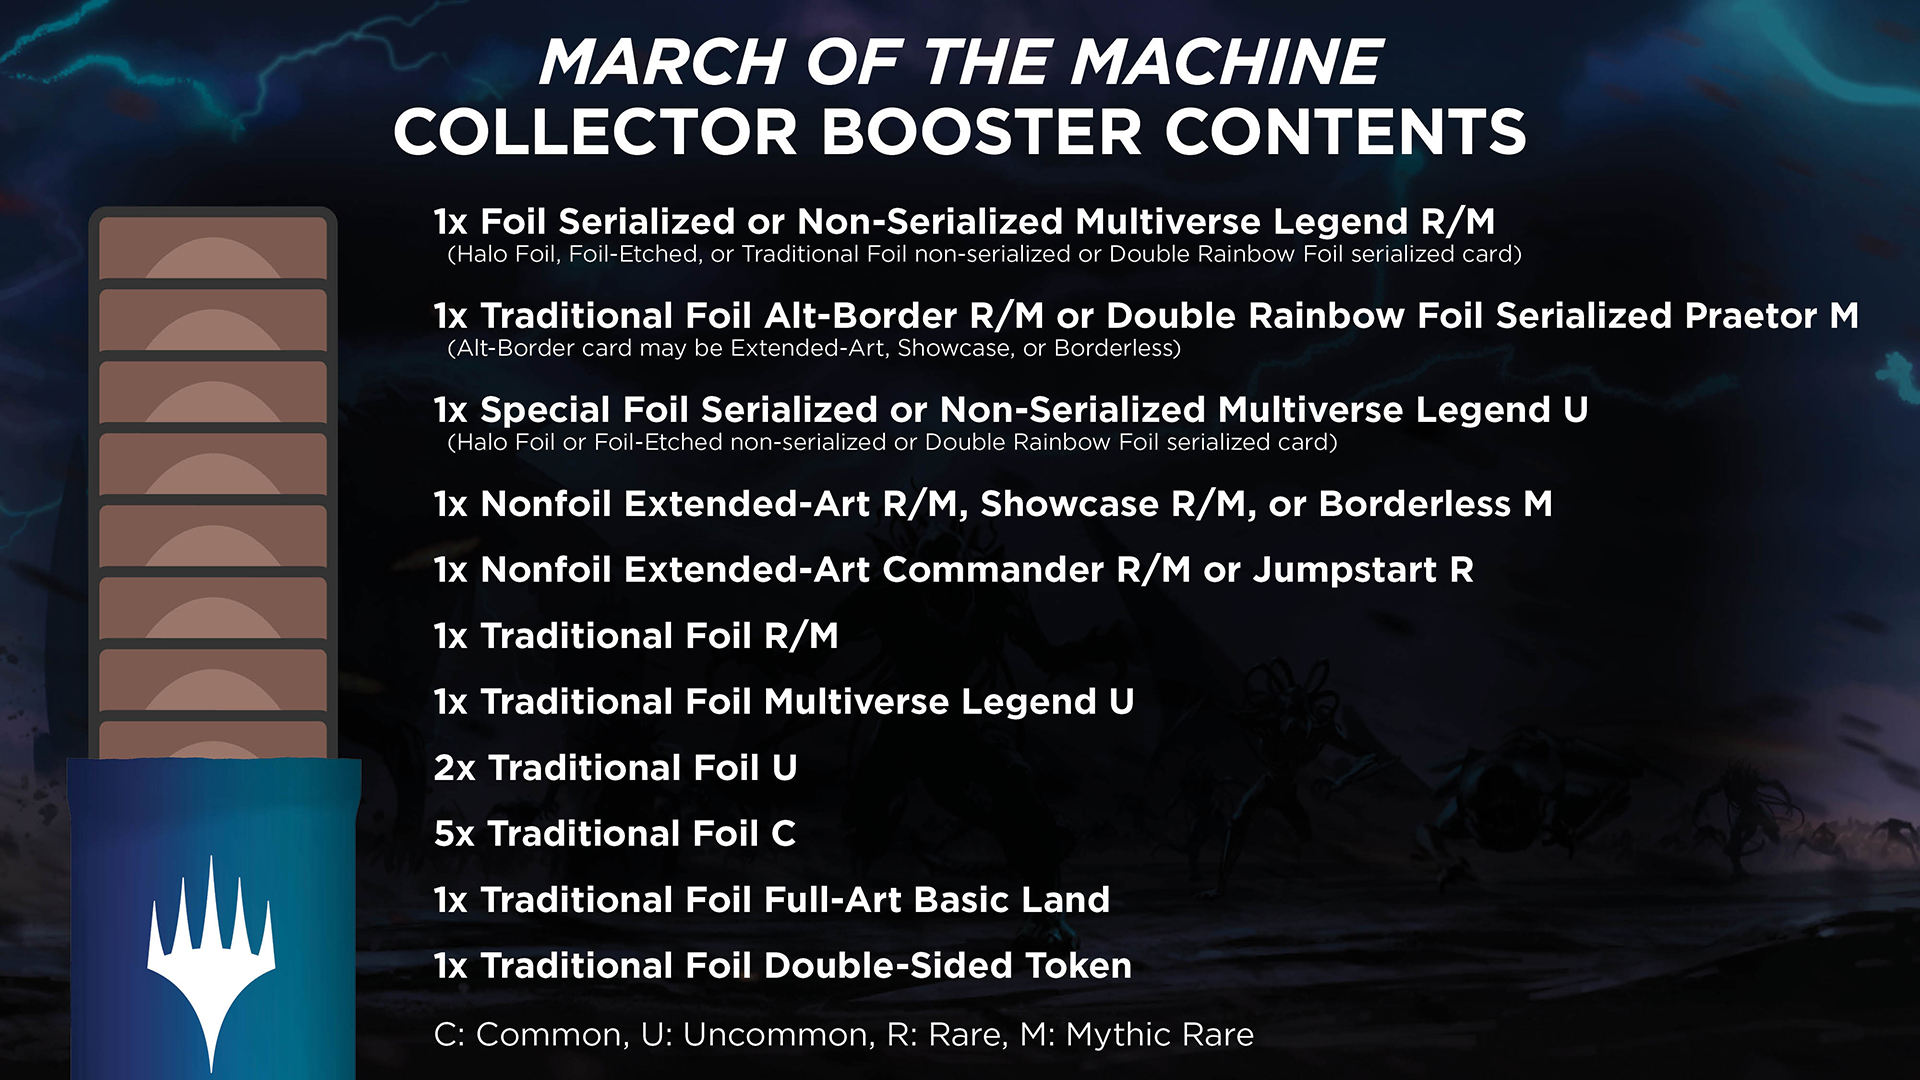 March of the Machine Collector Booster Contents